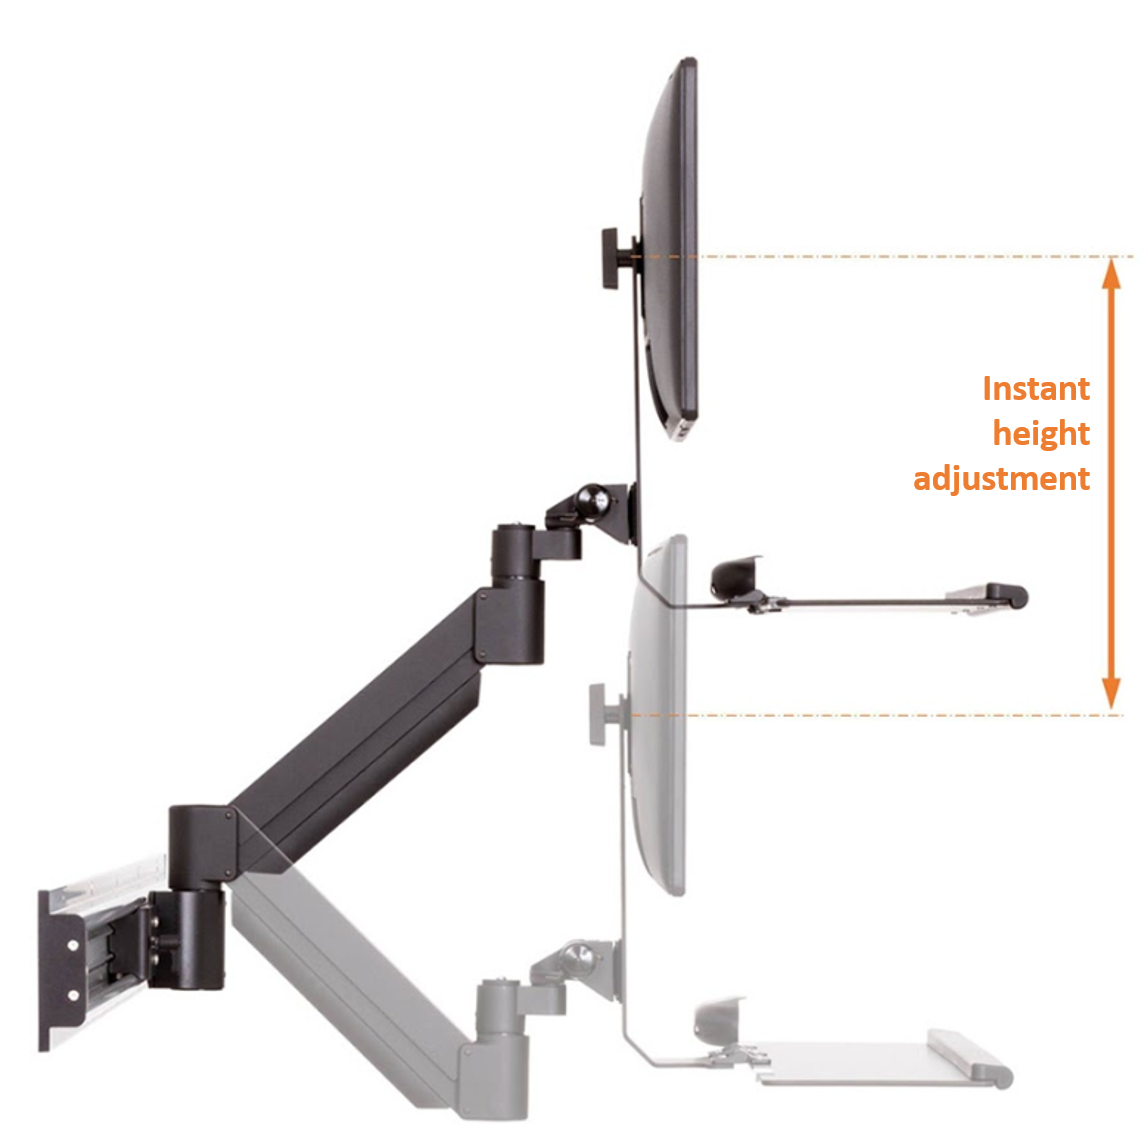 SERIES-118 instant height adjustment of workstation keyboard and monitor mount from a side view